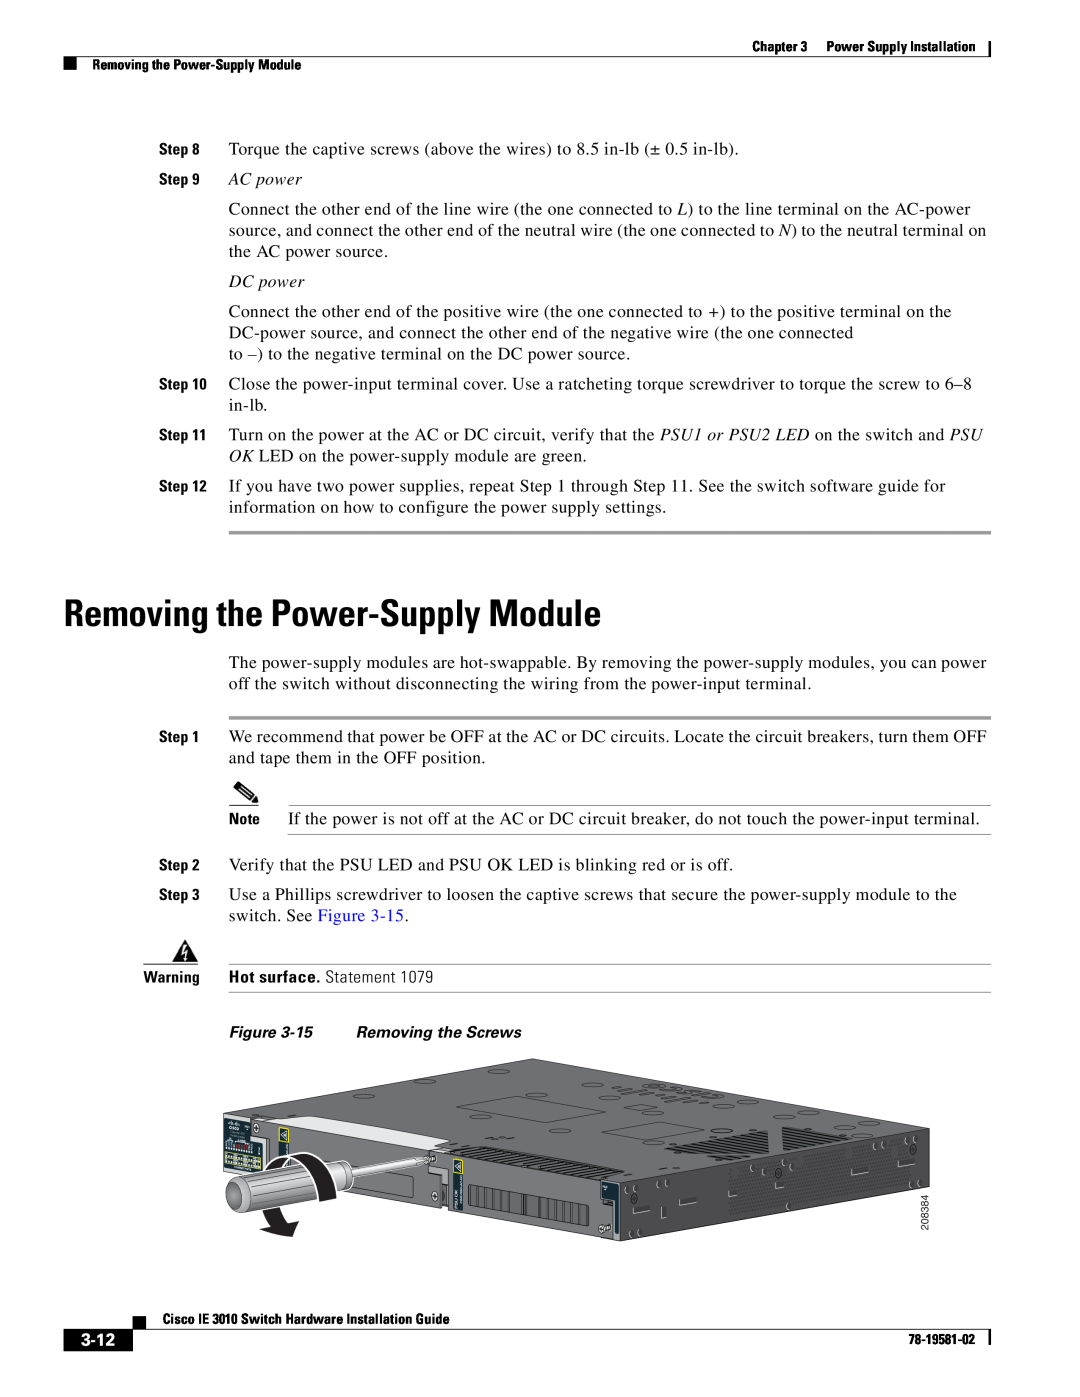 Cisco Systems IE301024TC Removing the Power-Supply Module, AC power, DC power, Warning Hot surface. Statement, 3-12 